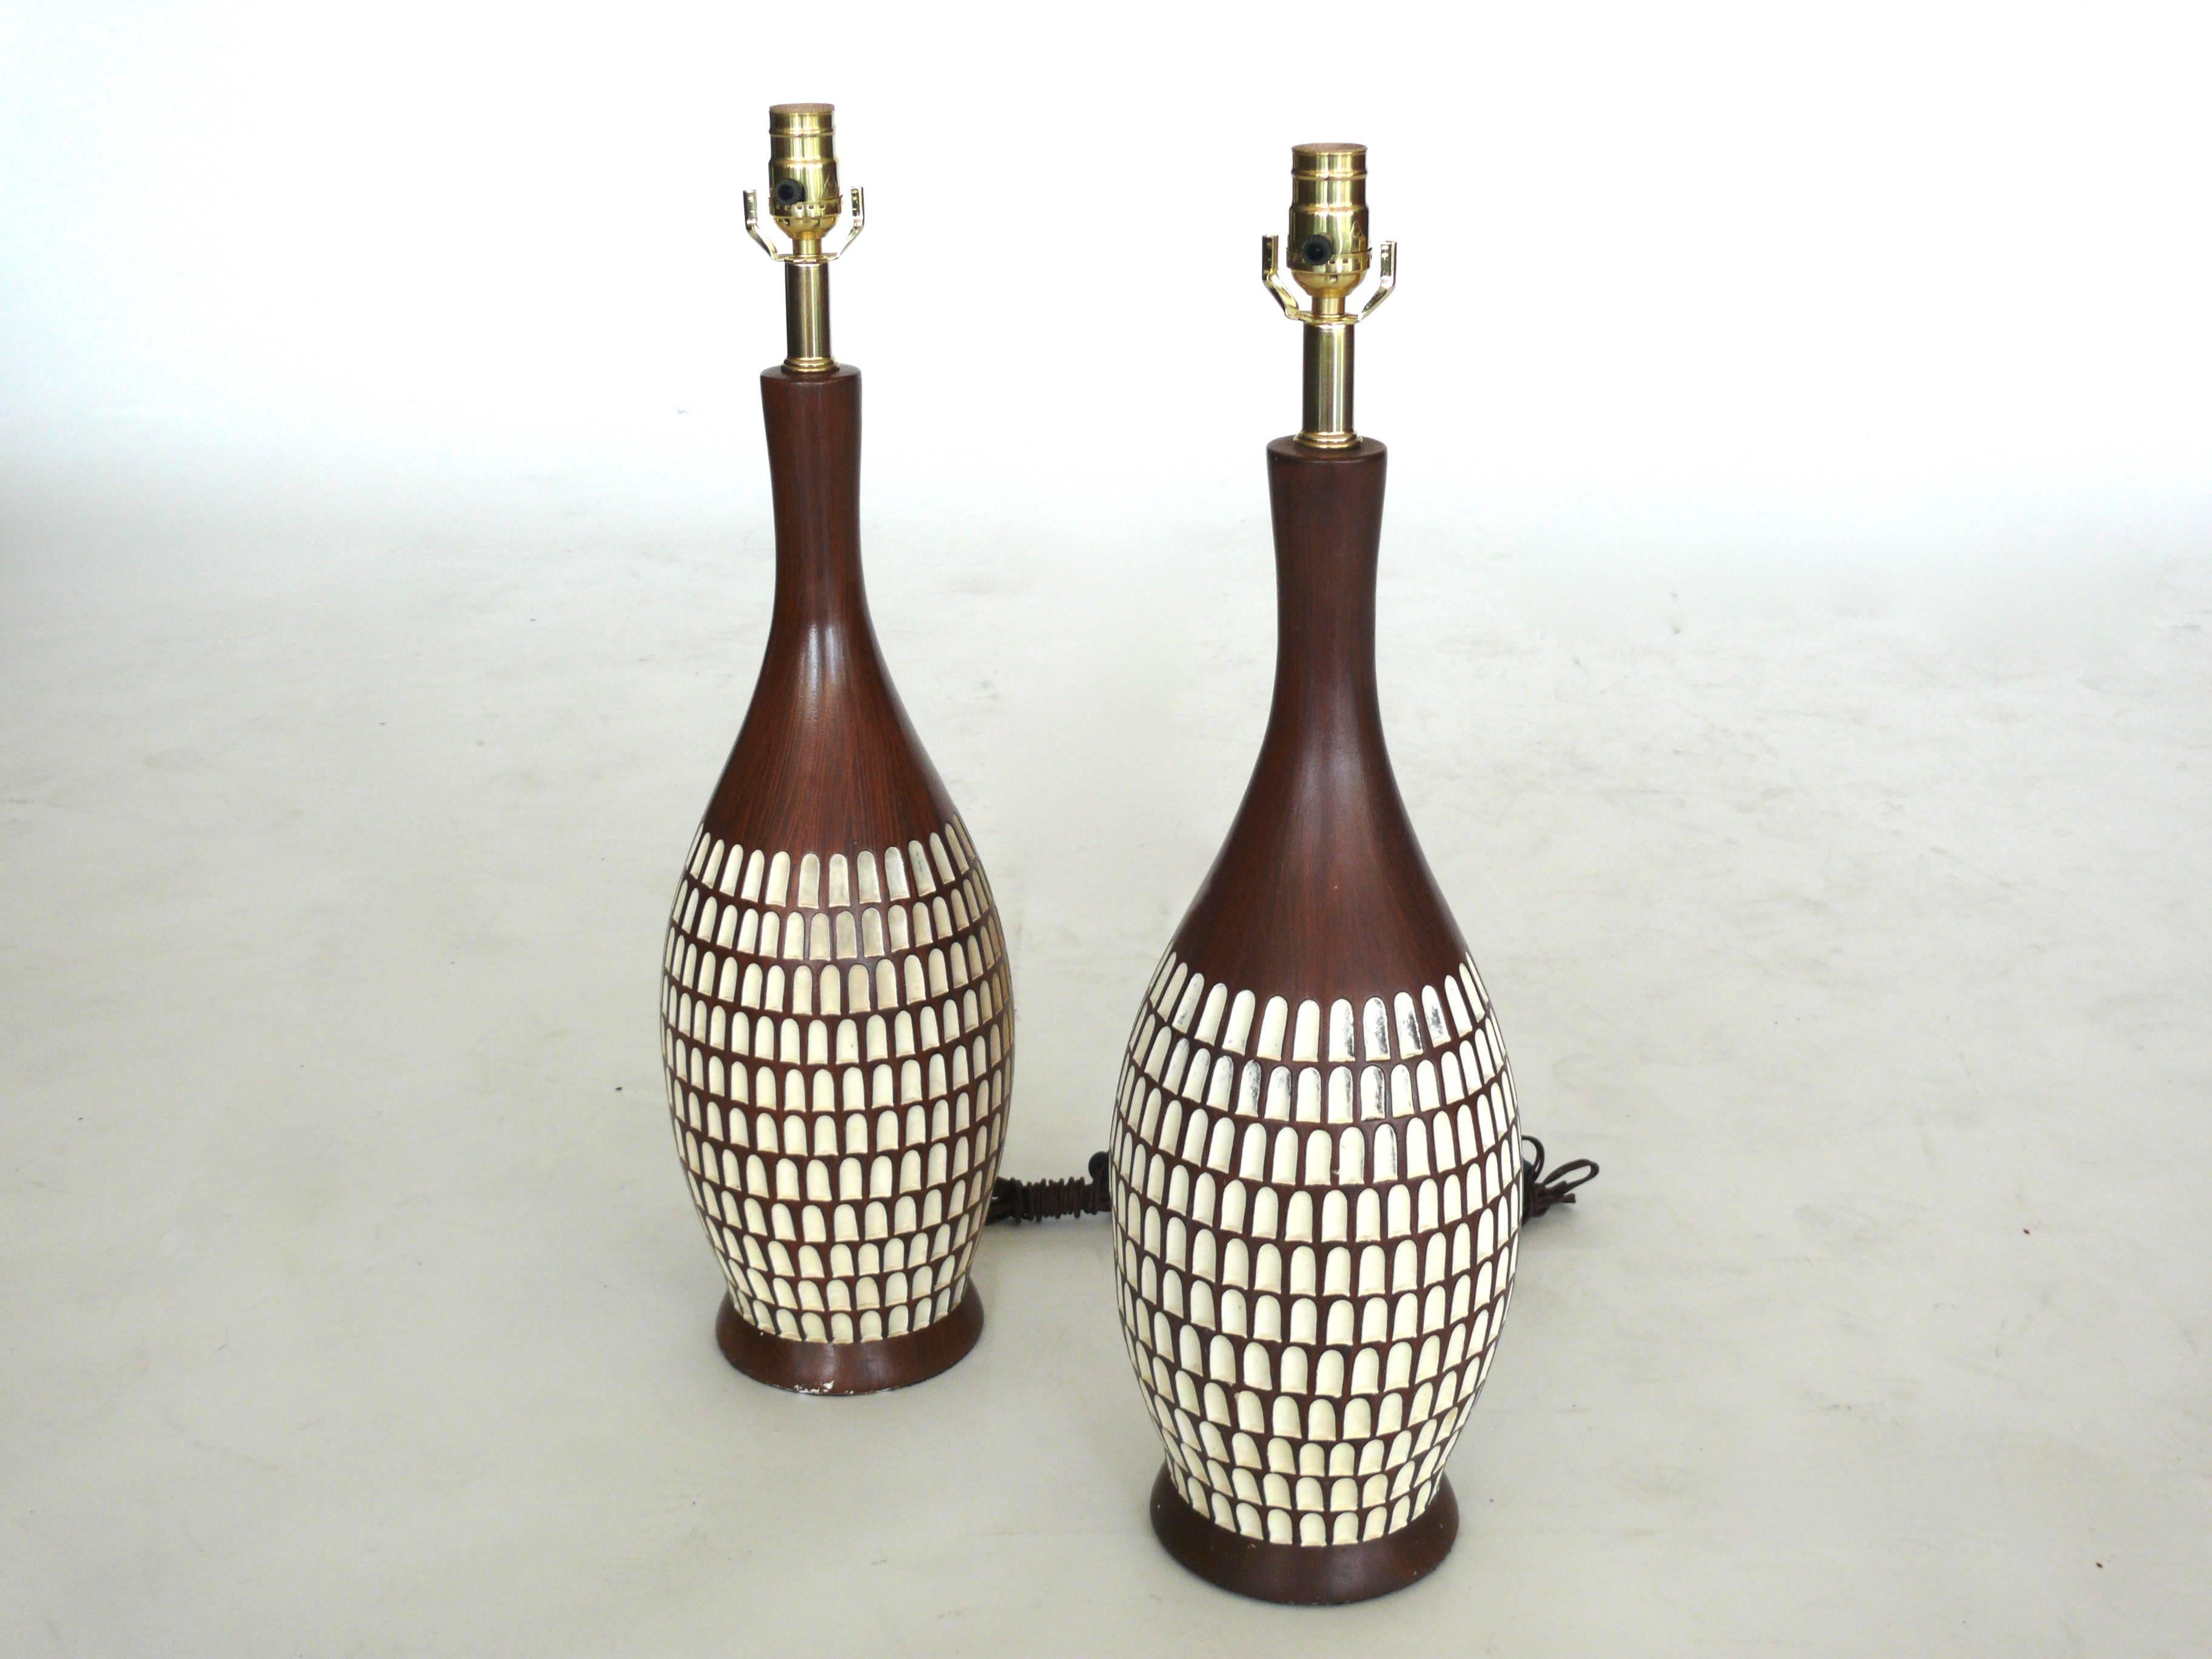 Great pair of fortune ceramic lamps in the appearance of teak but are actually entirely made of ceramic. Great bowling pin shape and newly rewired. 
Slight imperfections in the glaze indicative to its age.